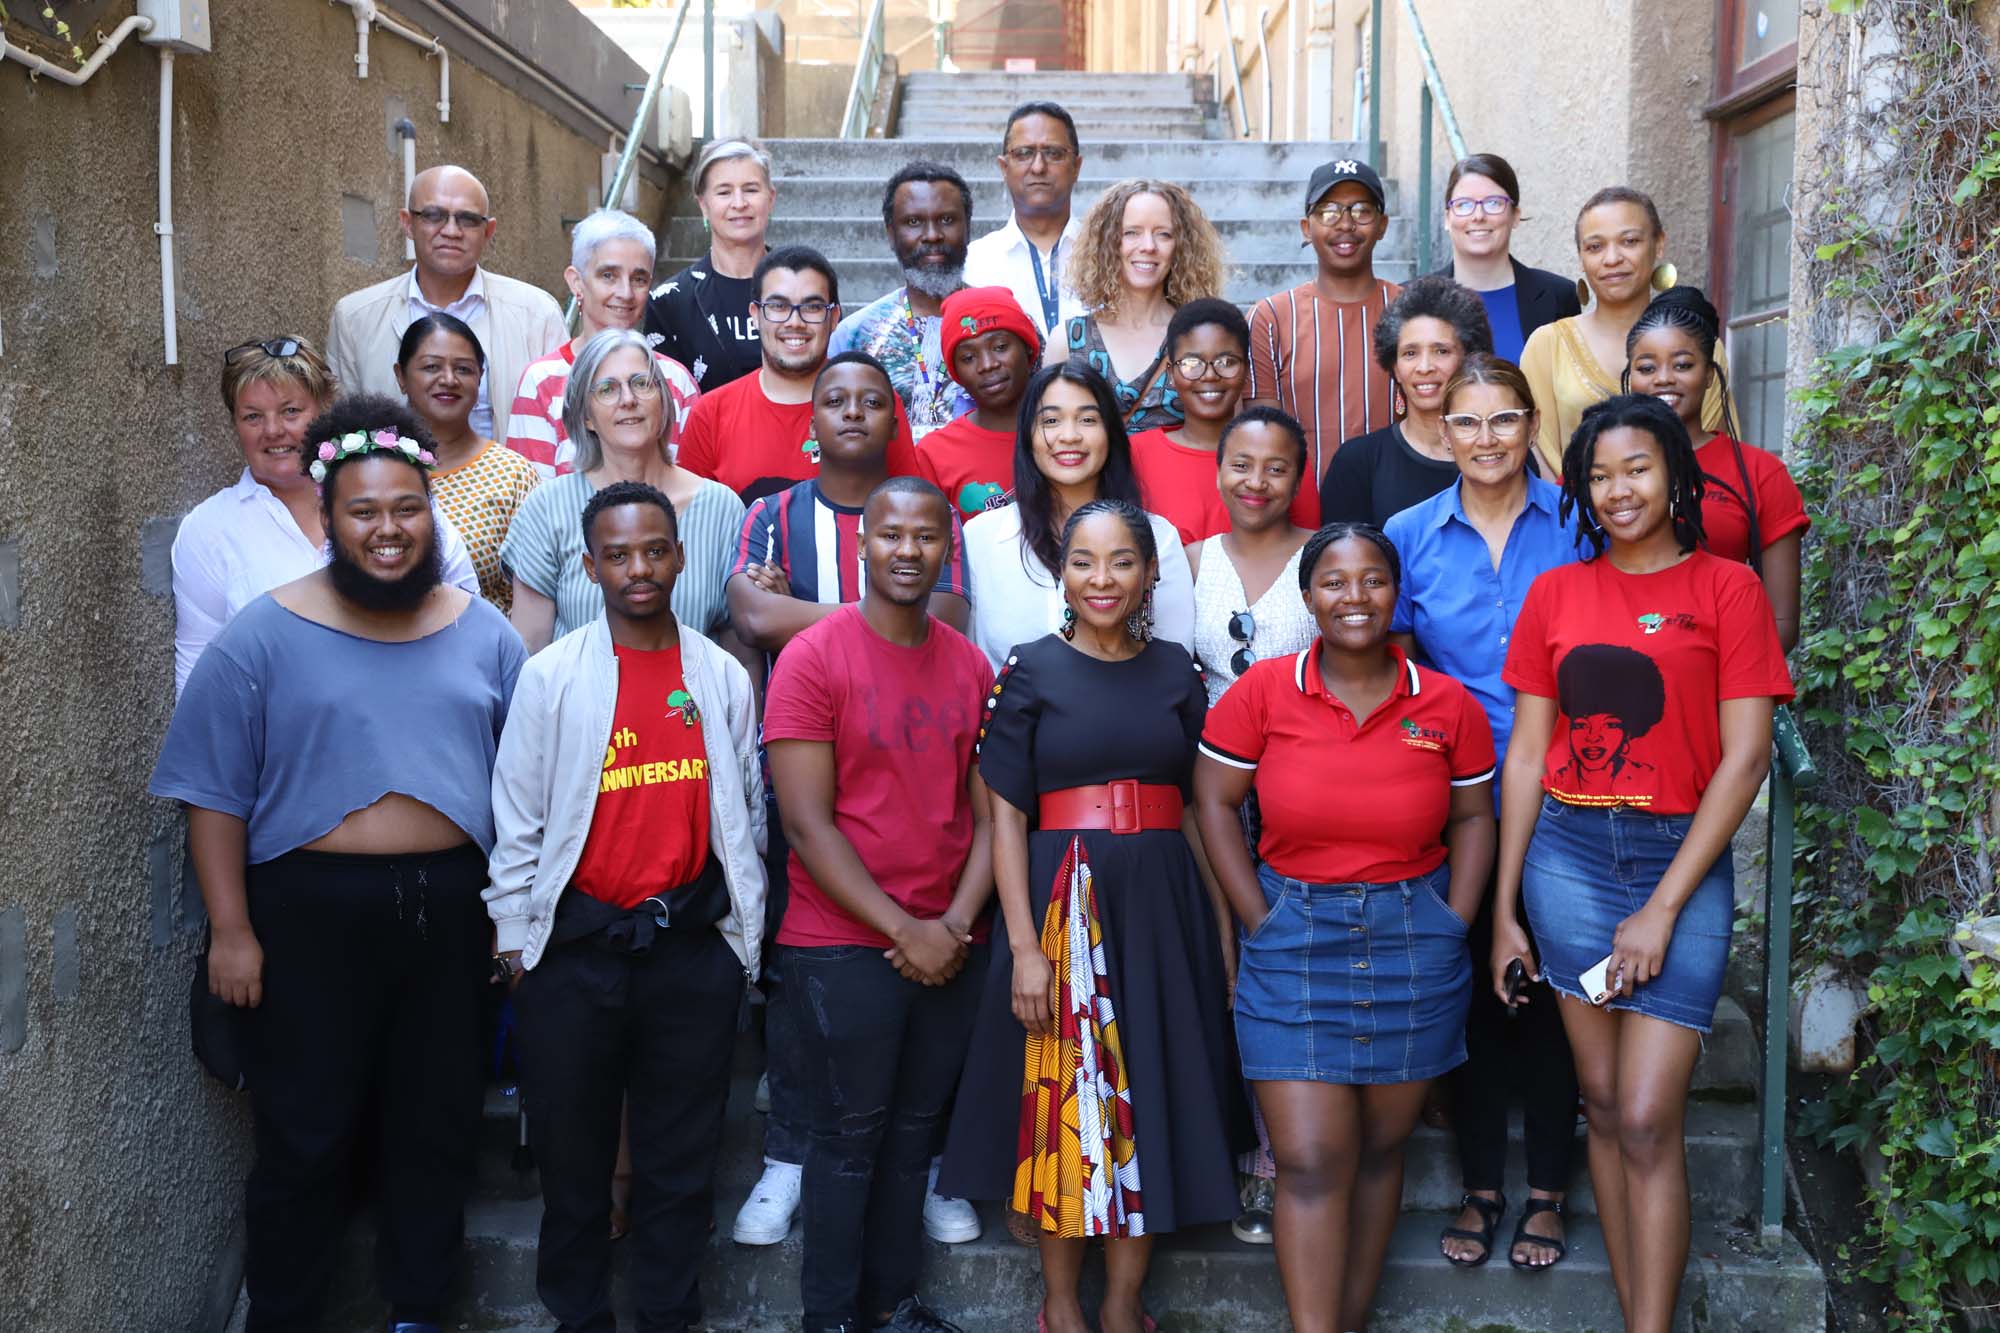 UCT’s Students’ Representative Council 2019/20 with members of the UCT leadership.